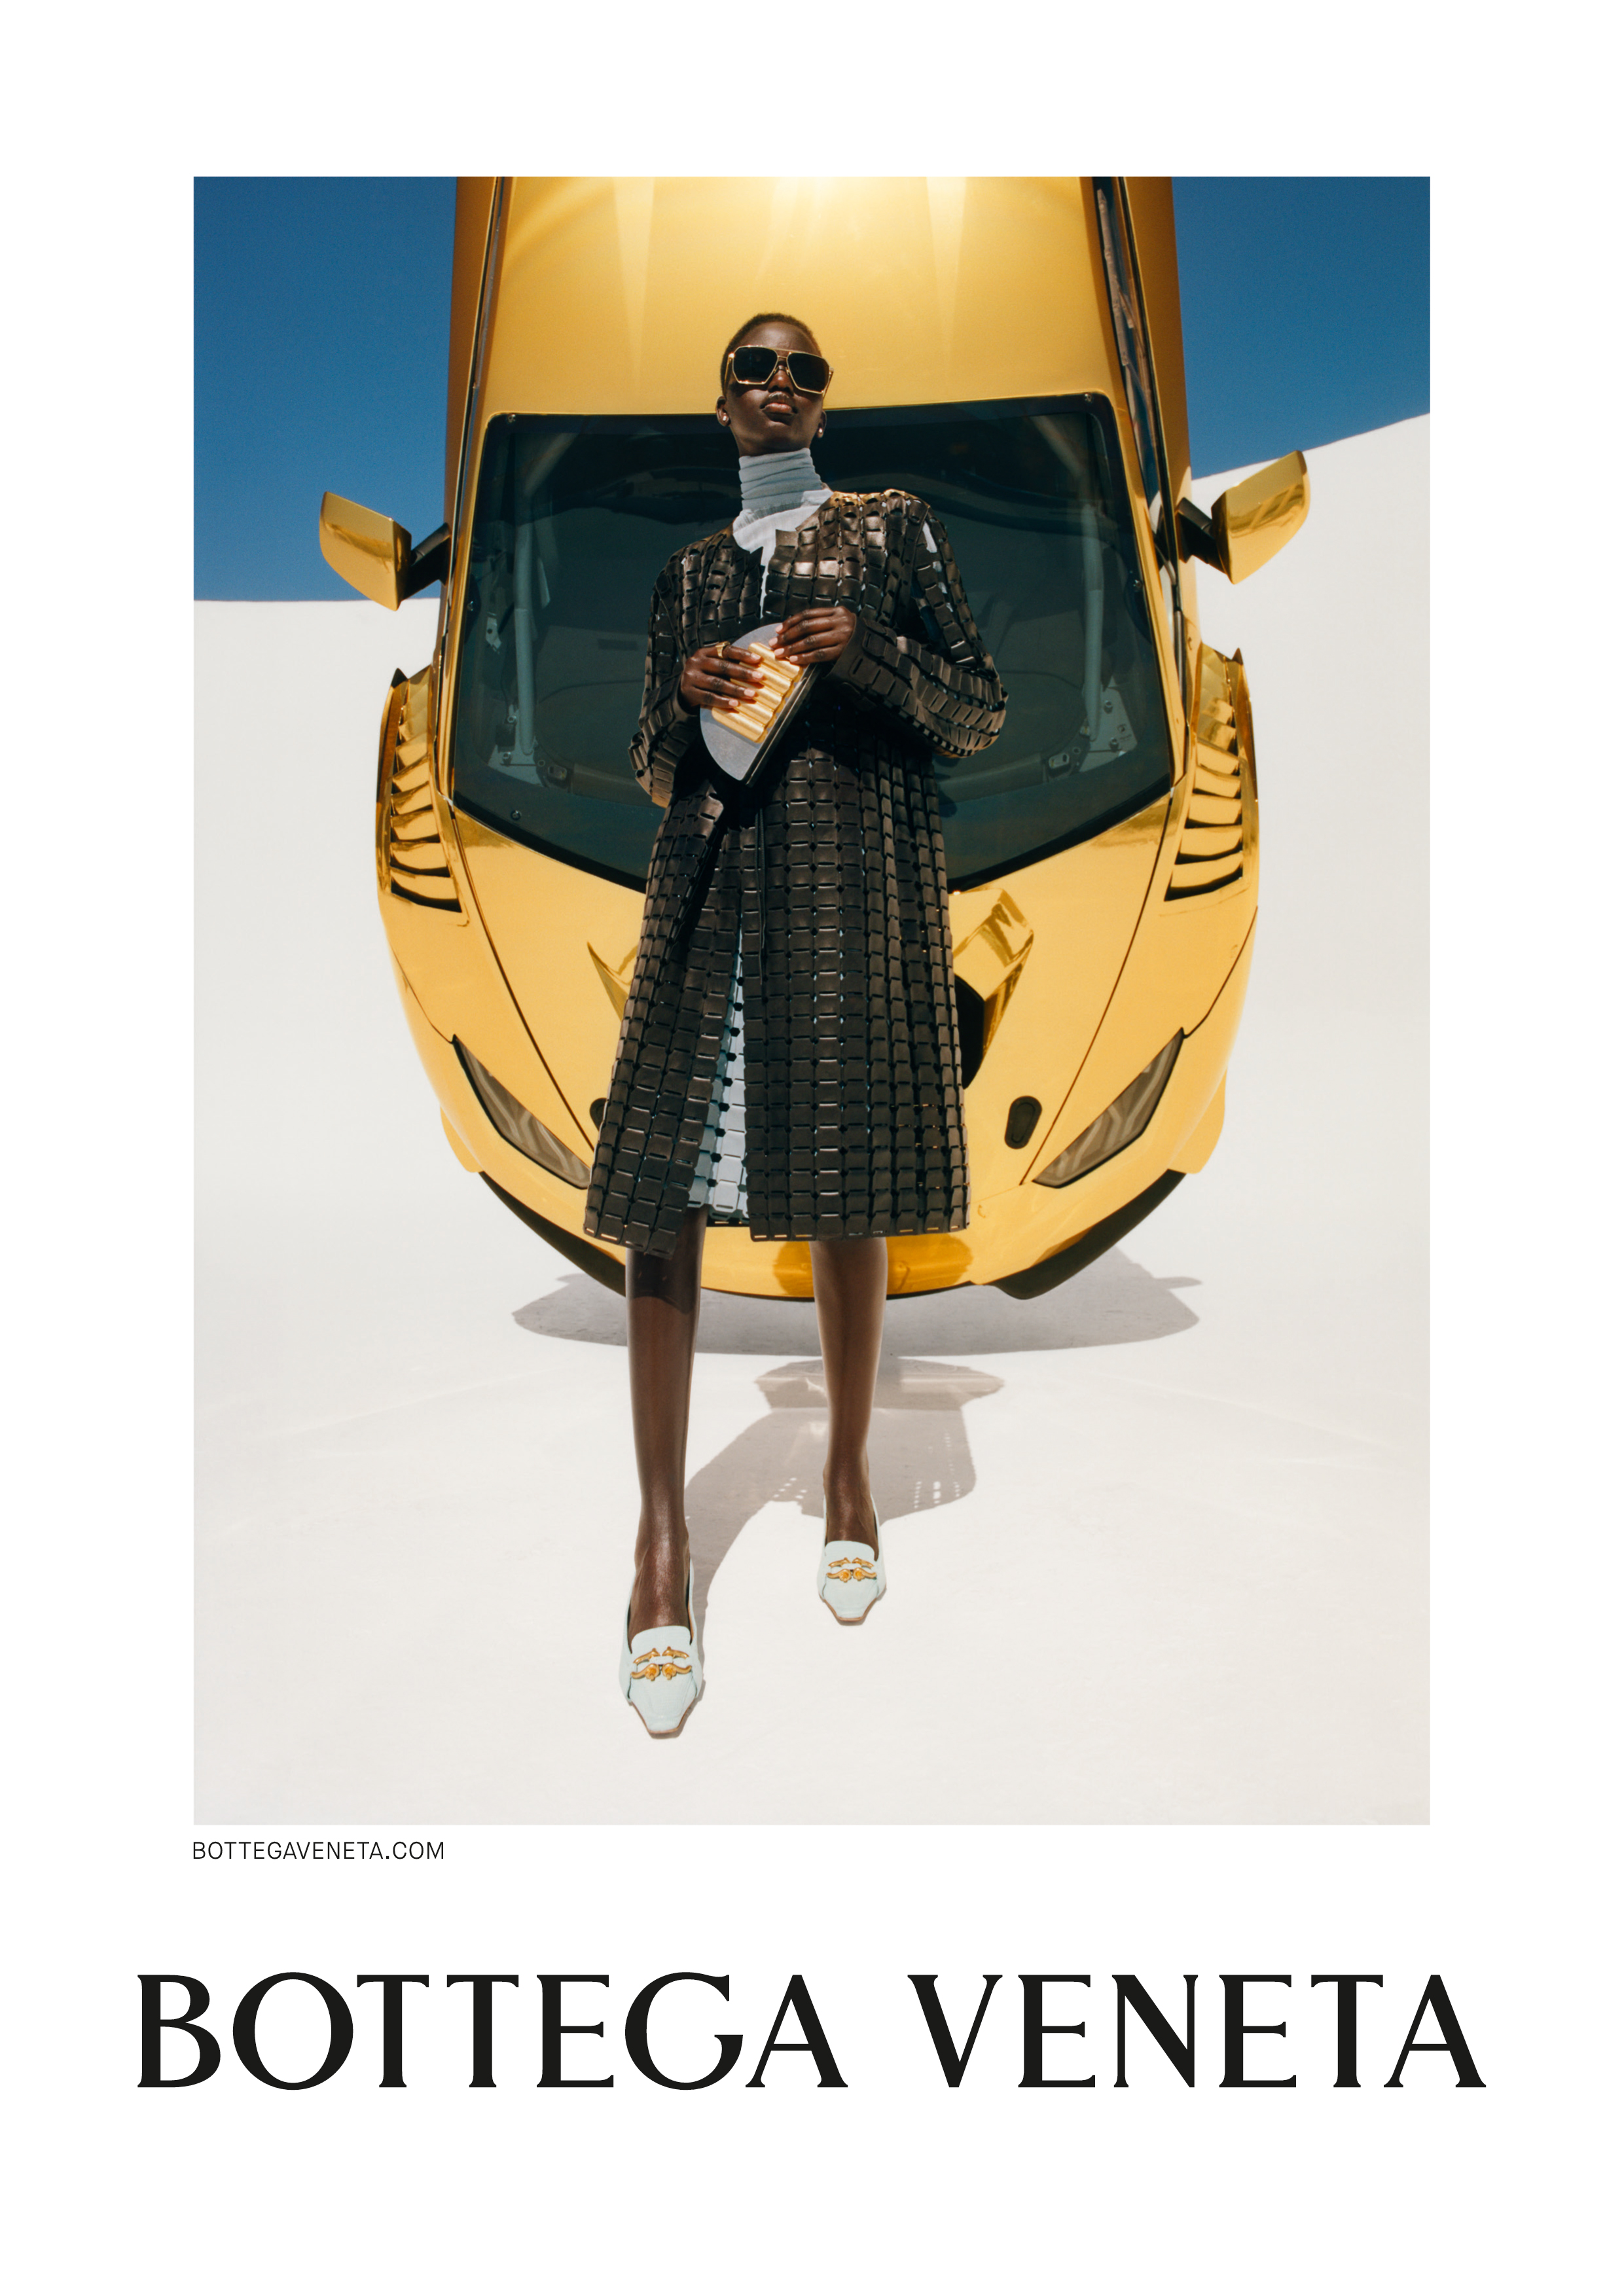 The Most Influential Sustainable Collection Campaigns of 2019: Part 1